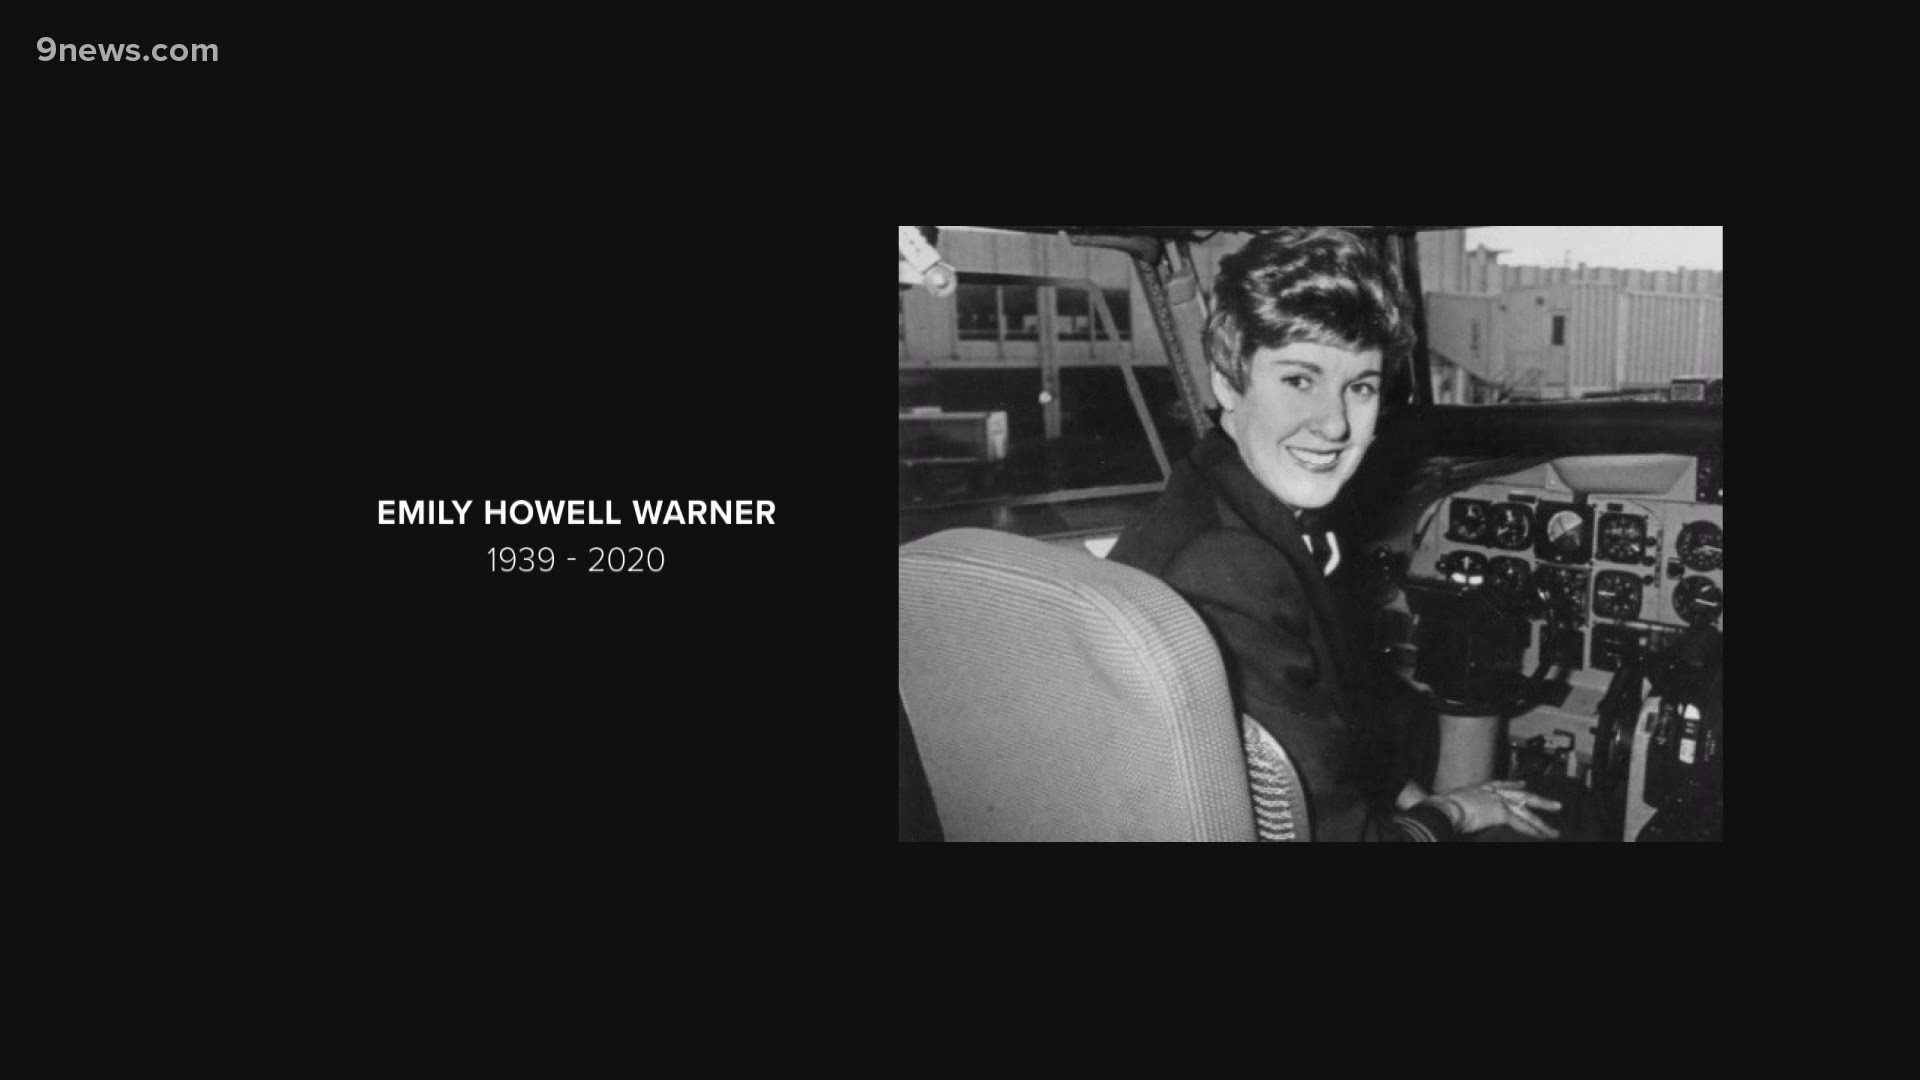 The first female U.S. airline pilot and captain has died. Emily Howell Warner was born in Denver in 1939 – she was 80 years old.